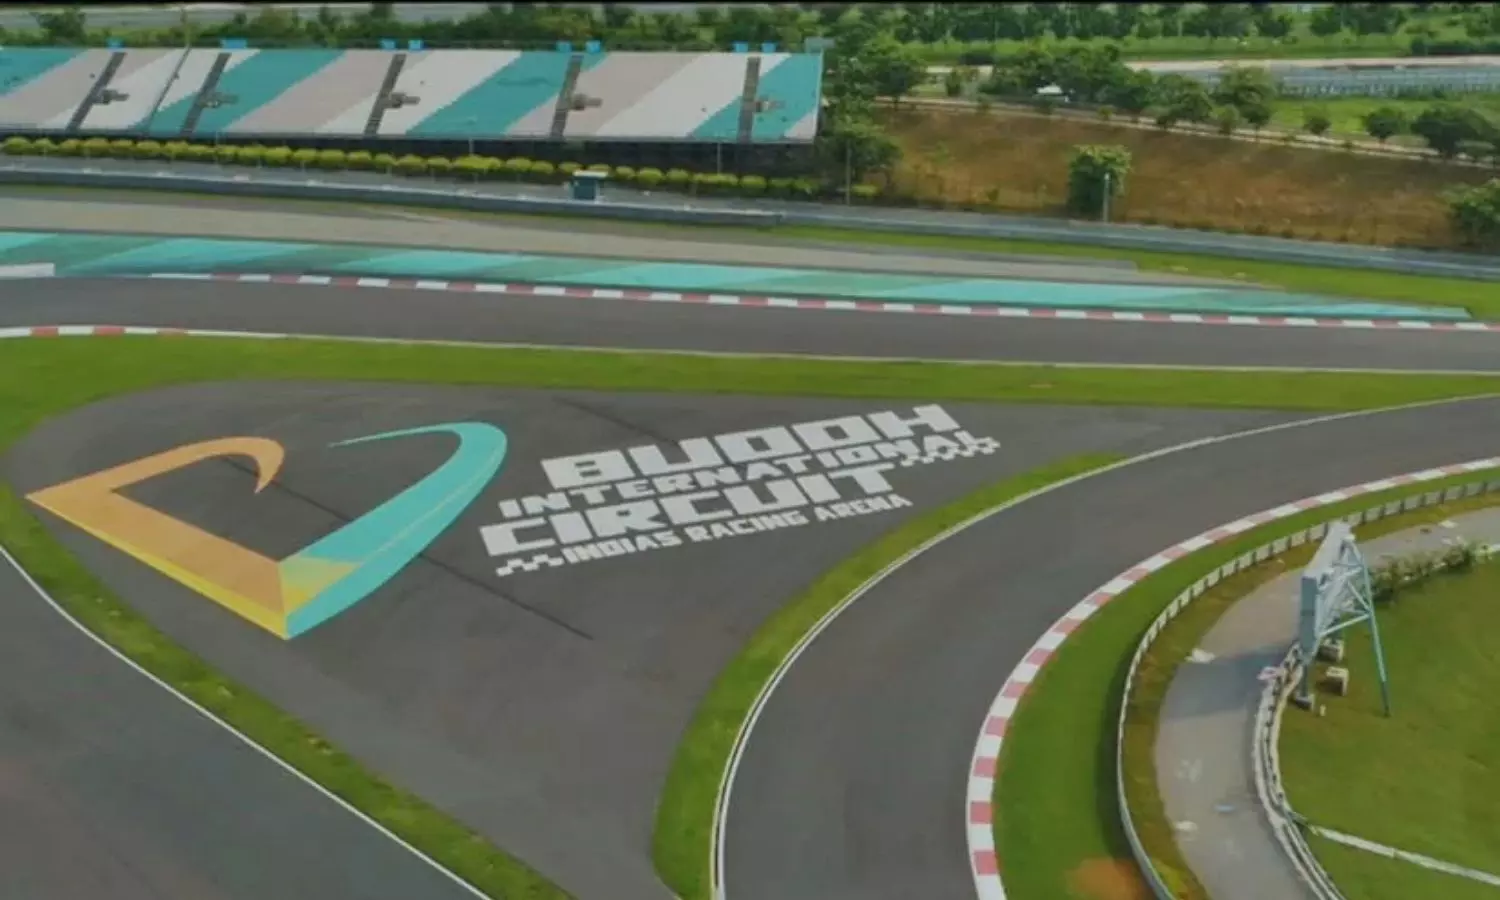 what is the current status of the buddh international circuit?